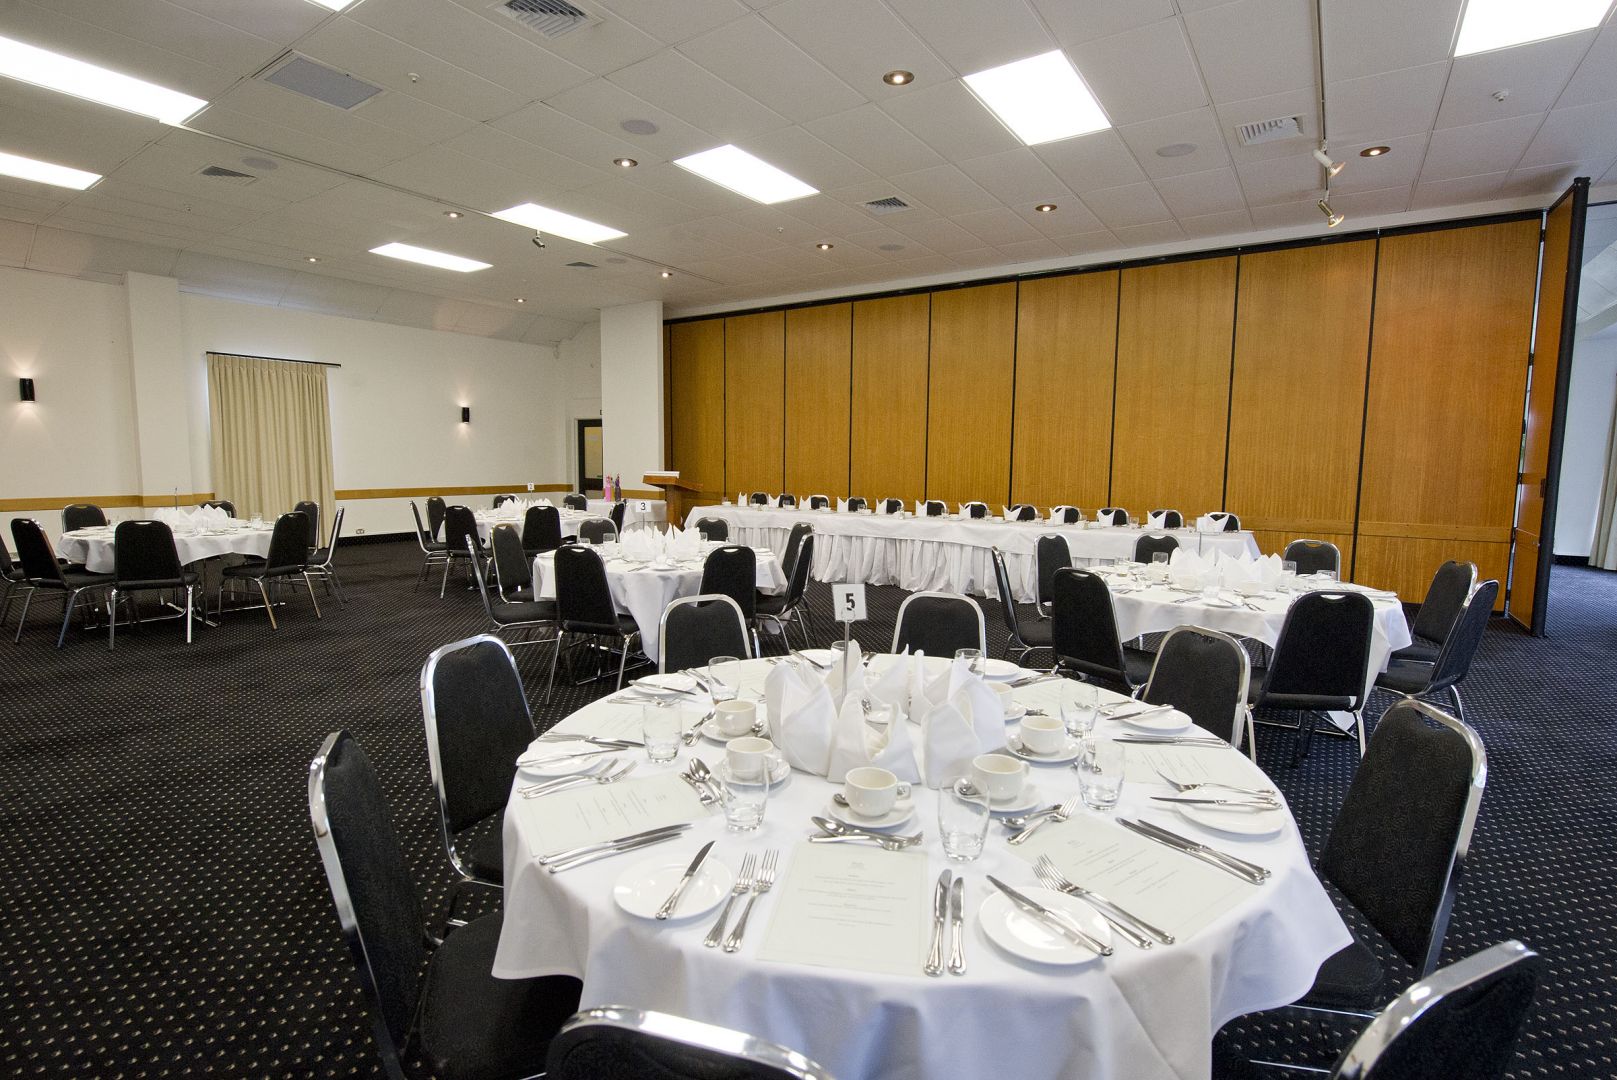 Hold Your Conference Or Function In The Endeavour Room At Auckland's Parnell Hotel & Conference Centre